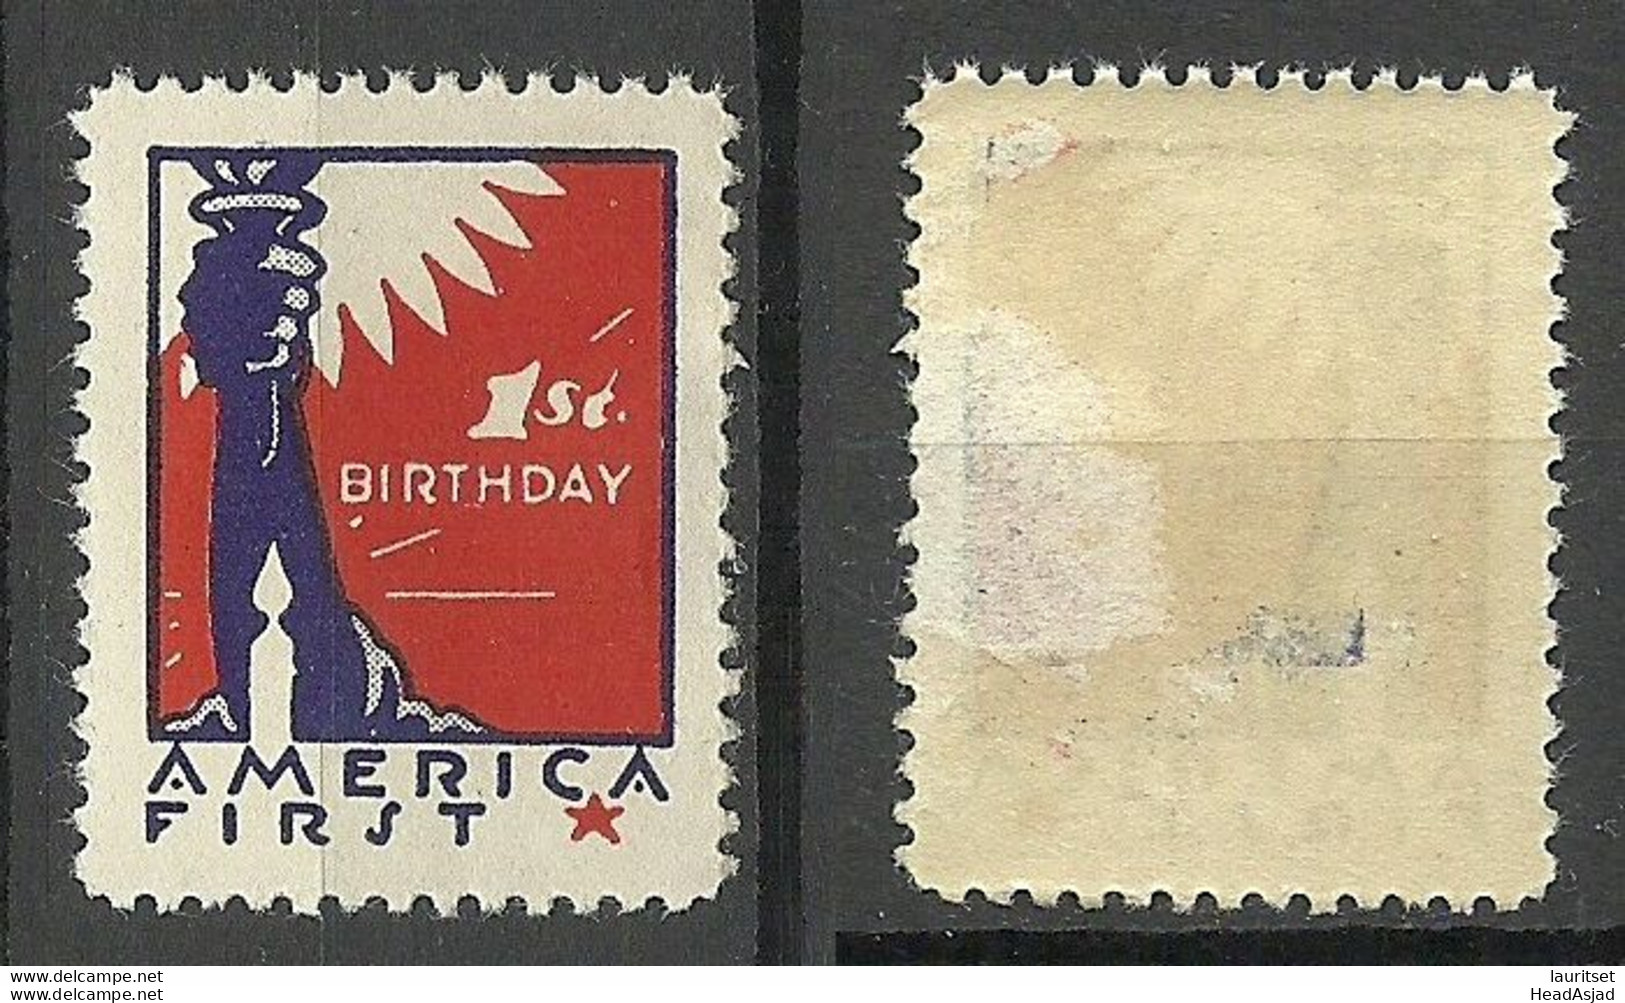 USA Patriotic Vignette America First Poster Stamp NB! Defect - Thinned Place! - Vignetten (Erinnophilie)